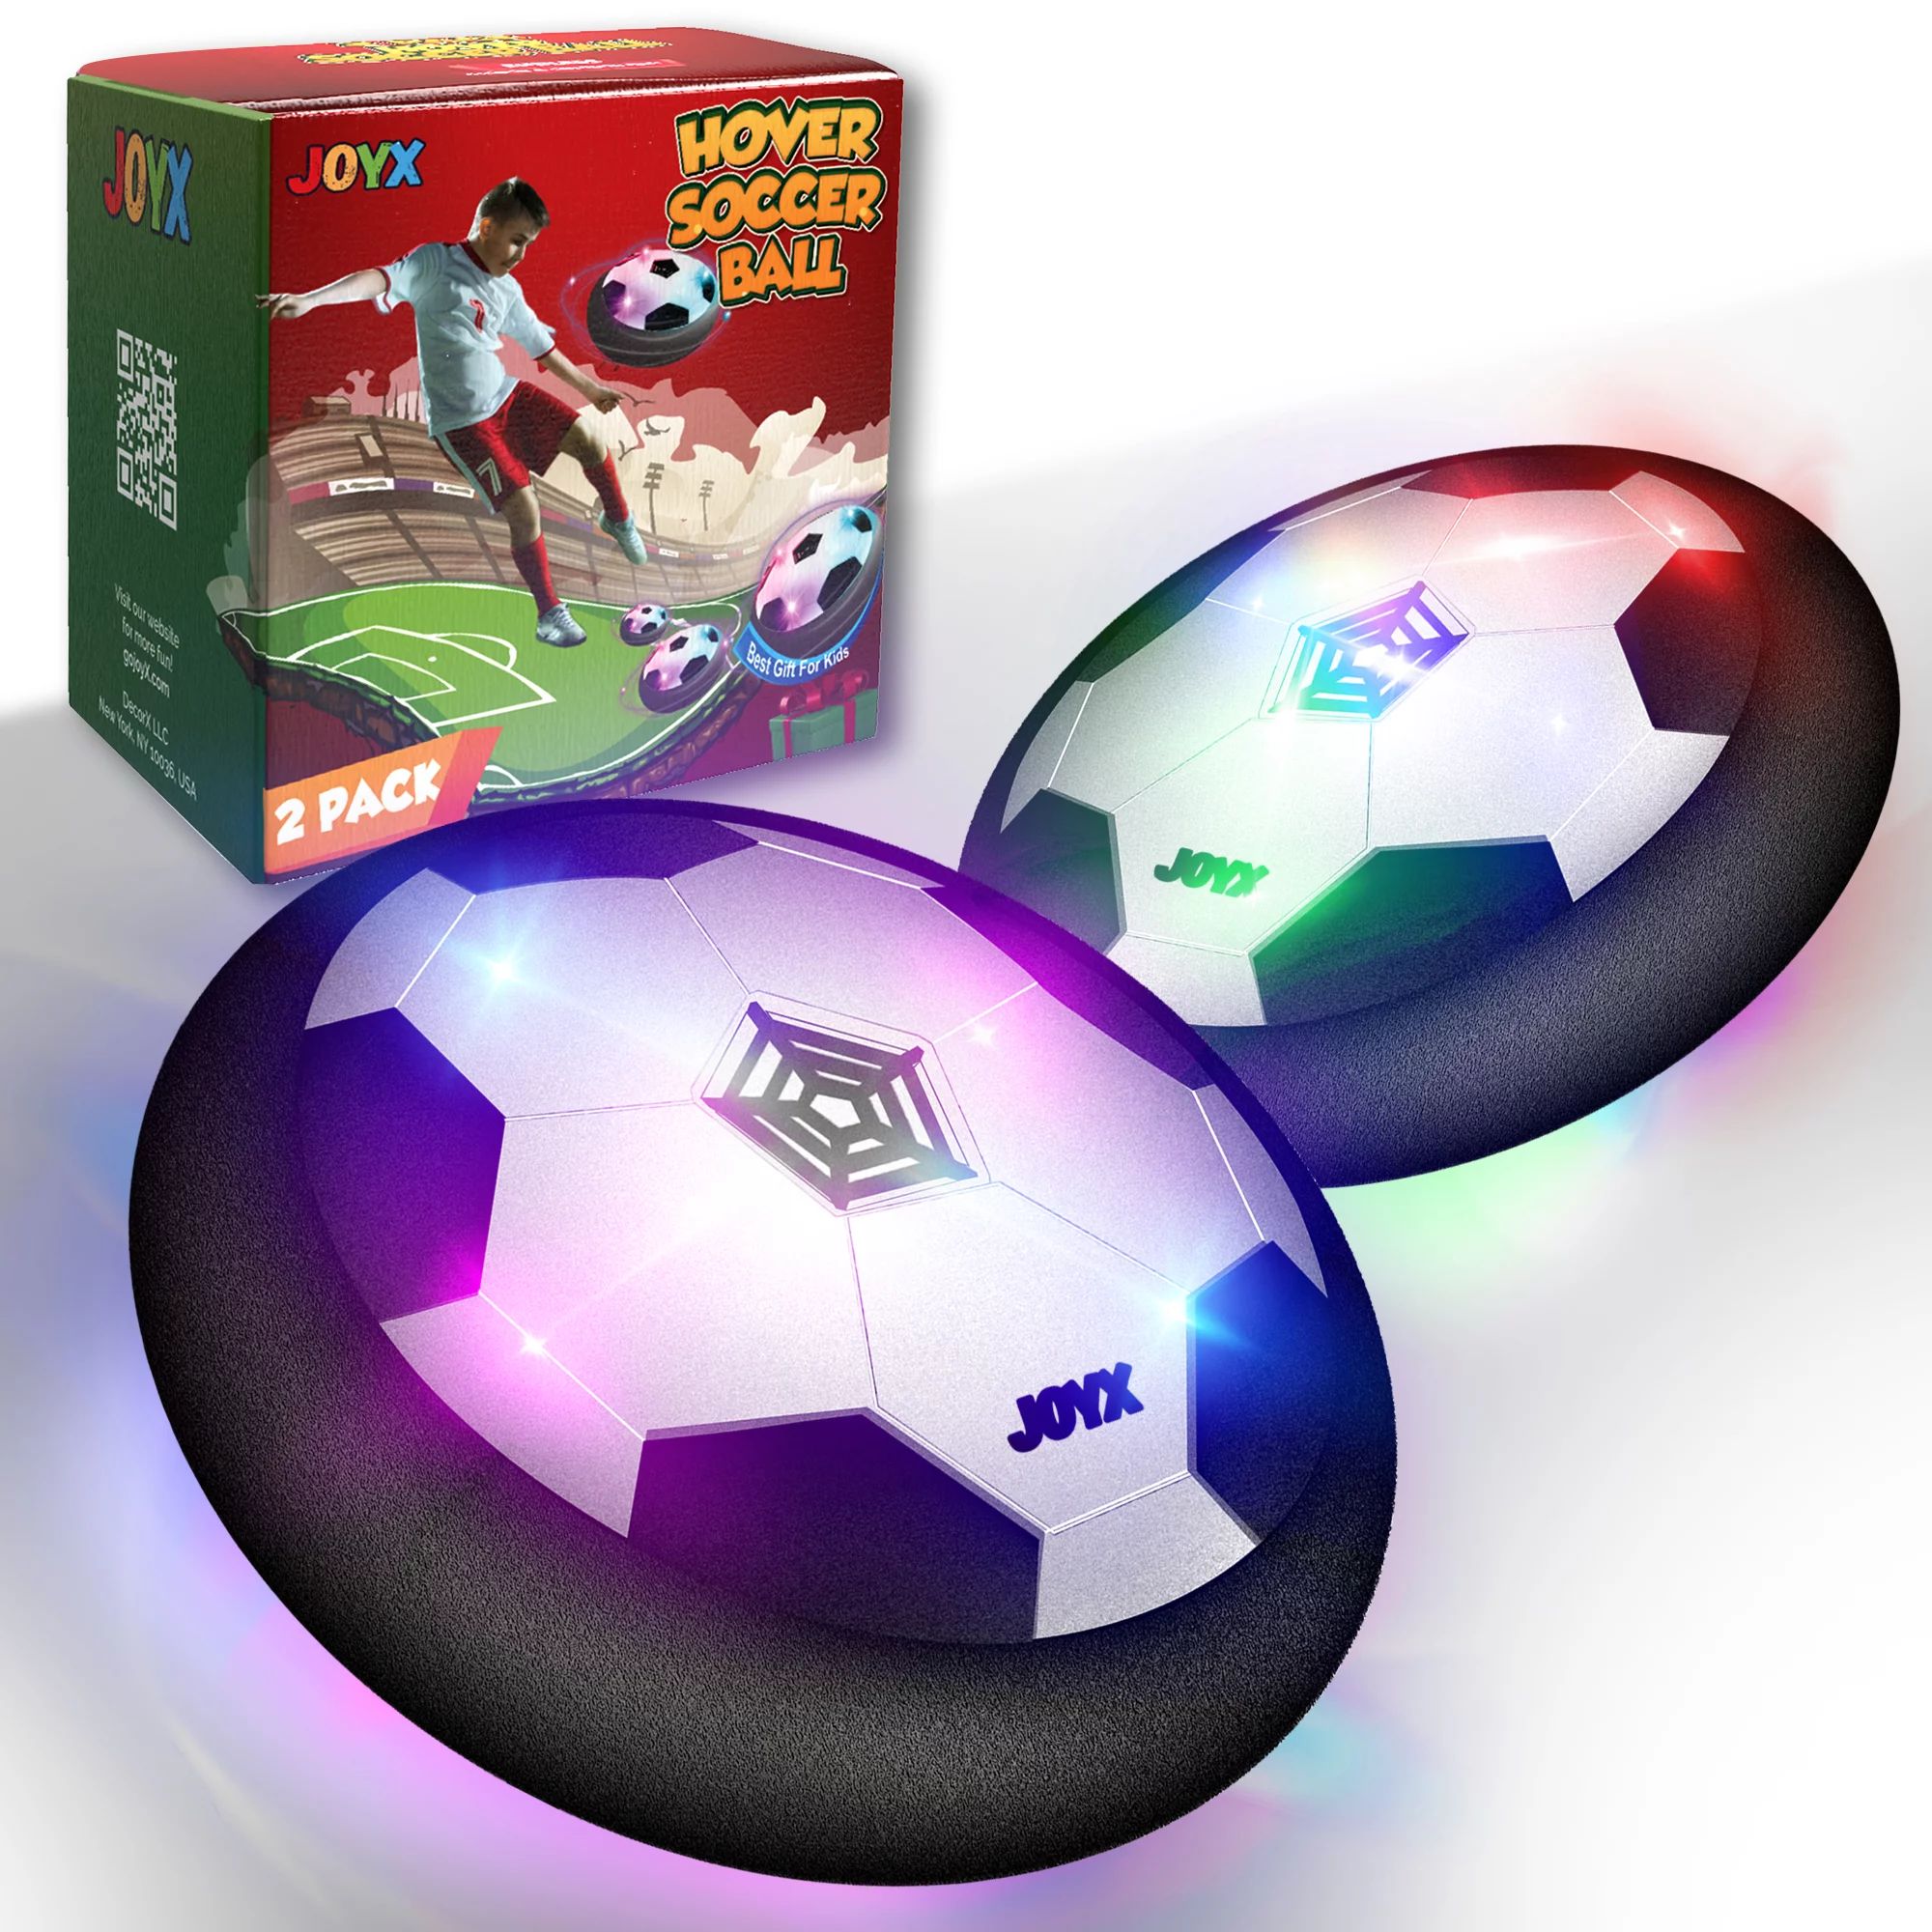 JoyX Air Hover Soccer Balls Toys for Kids, Indoor Games Activities with LED Lights and Foam Bumpe... | Walmart (US)